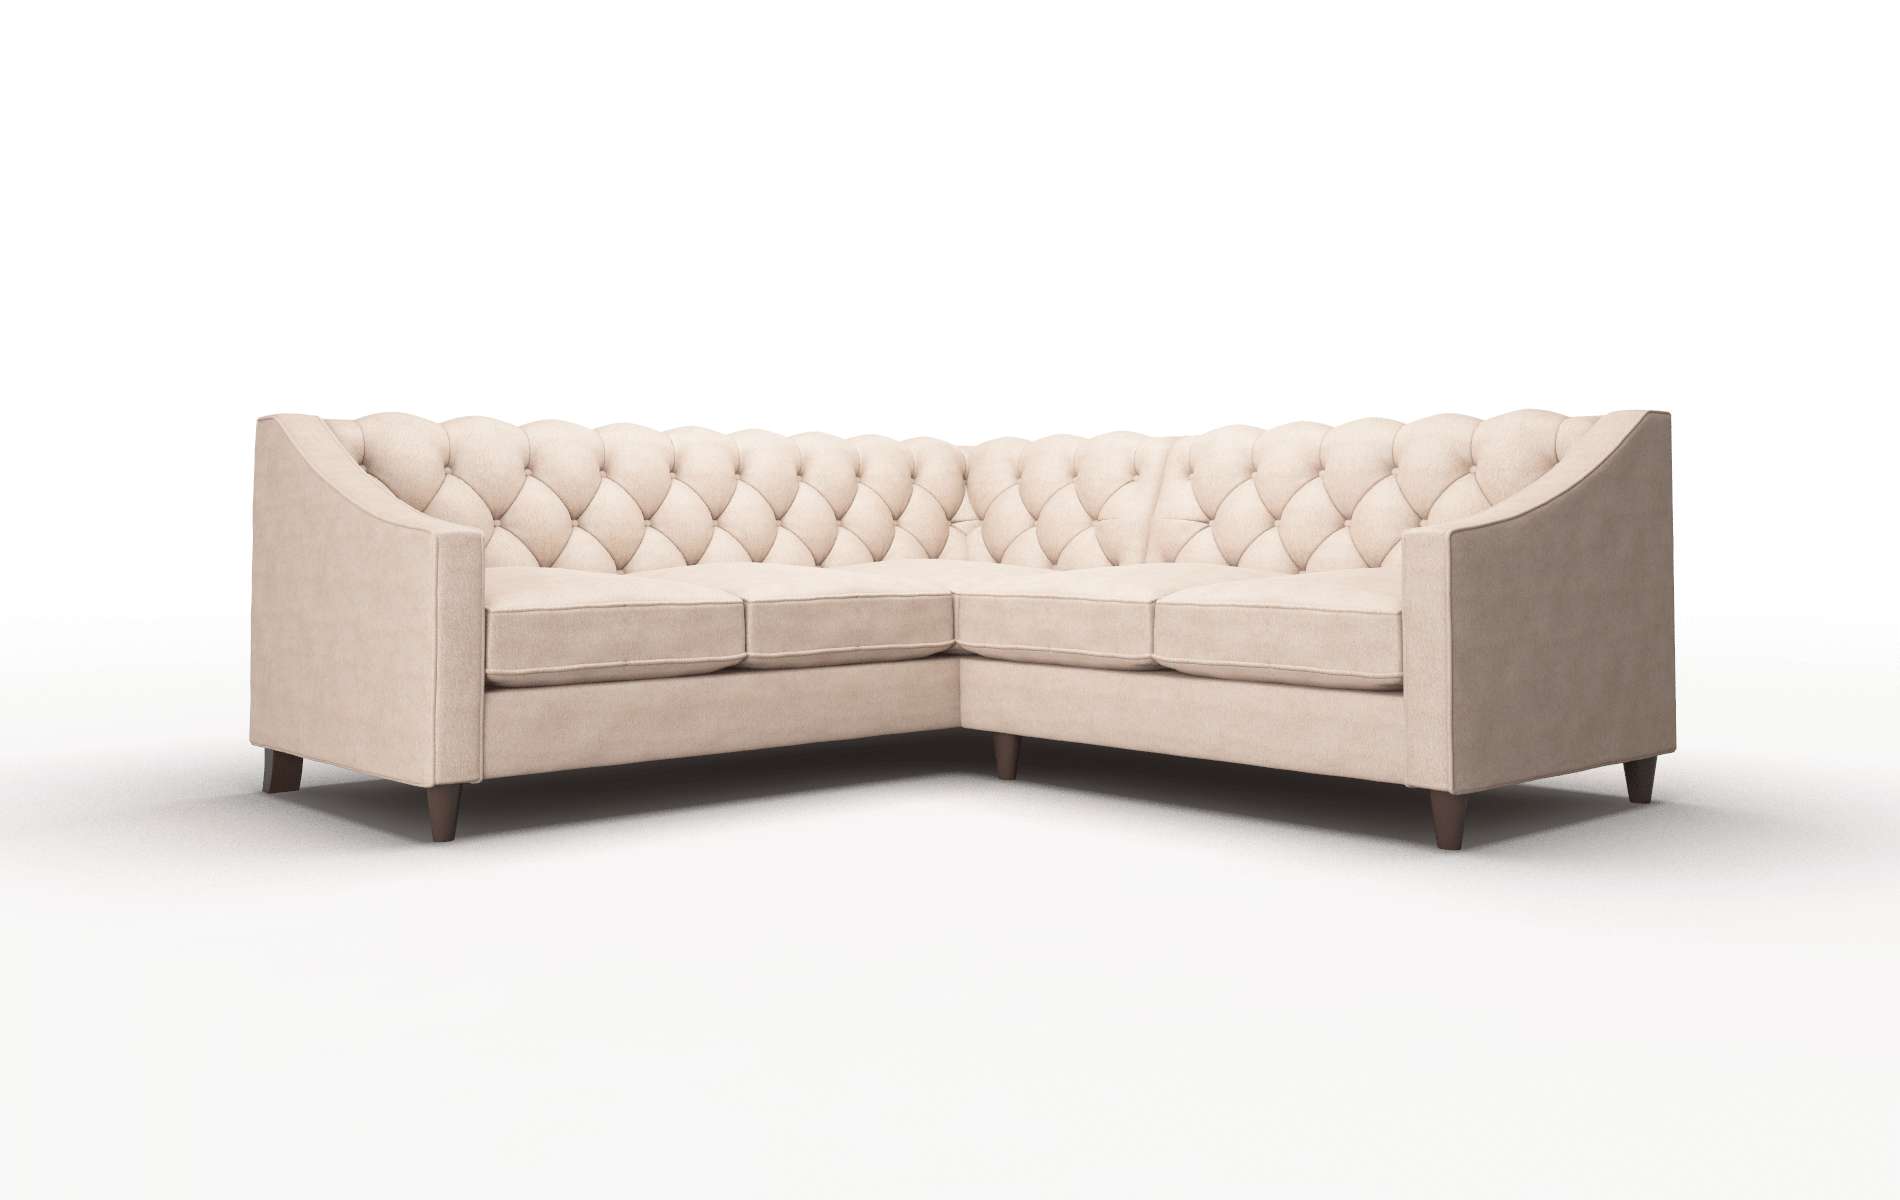 Manchester Bella Pewter Sectional espresso legs